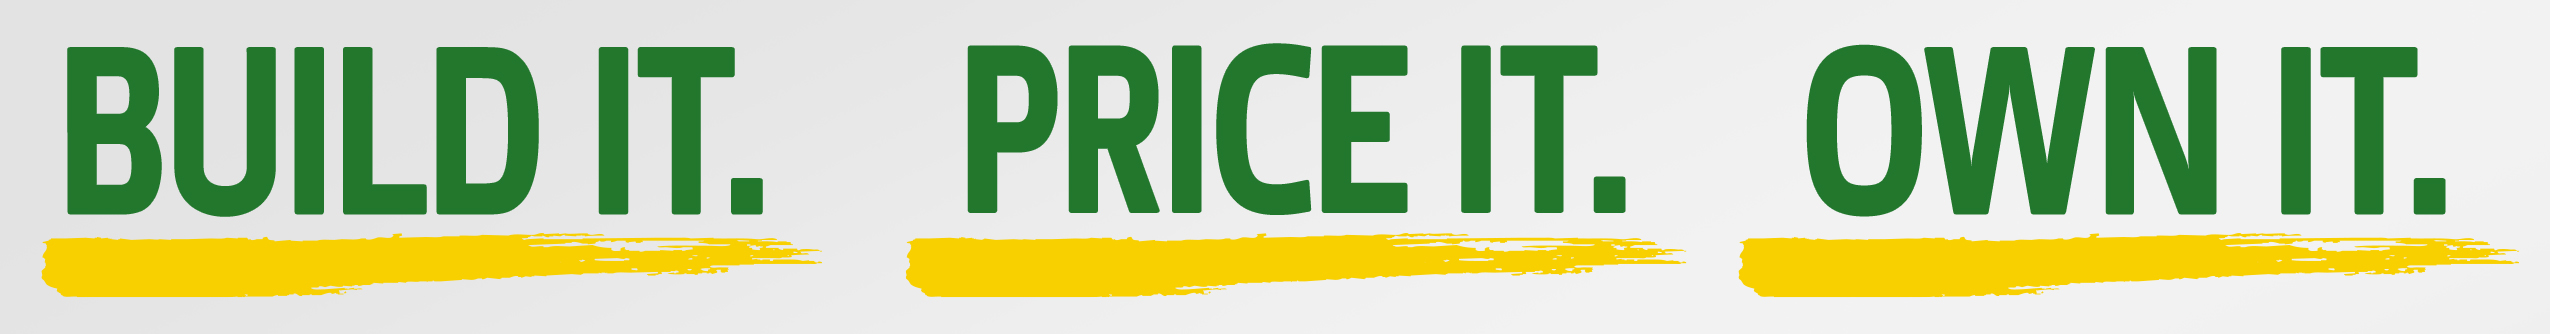 Build It Price It Own IT Banner